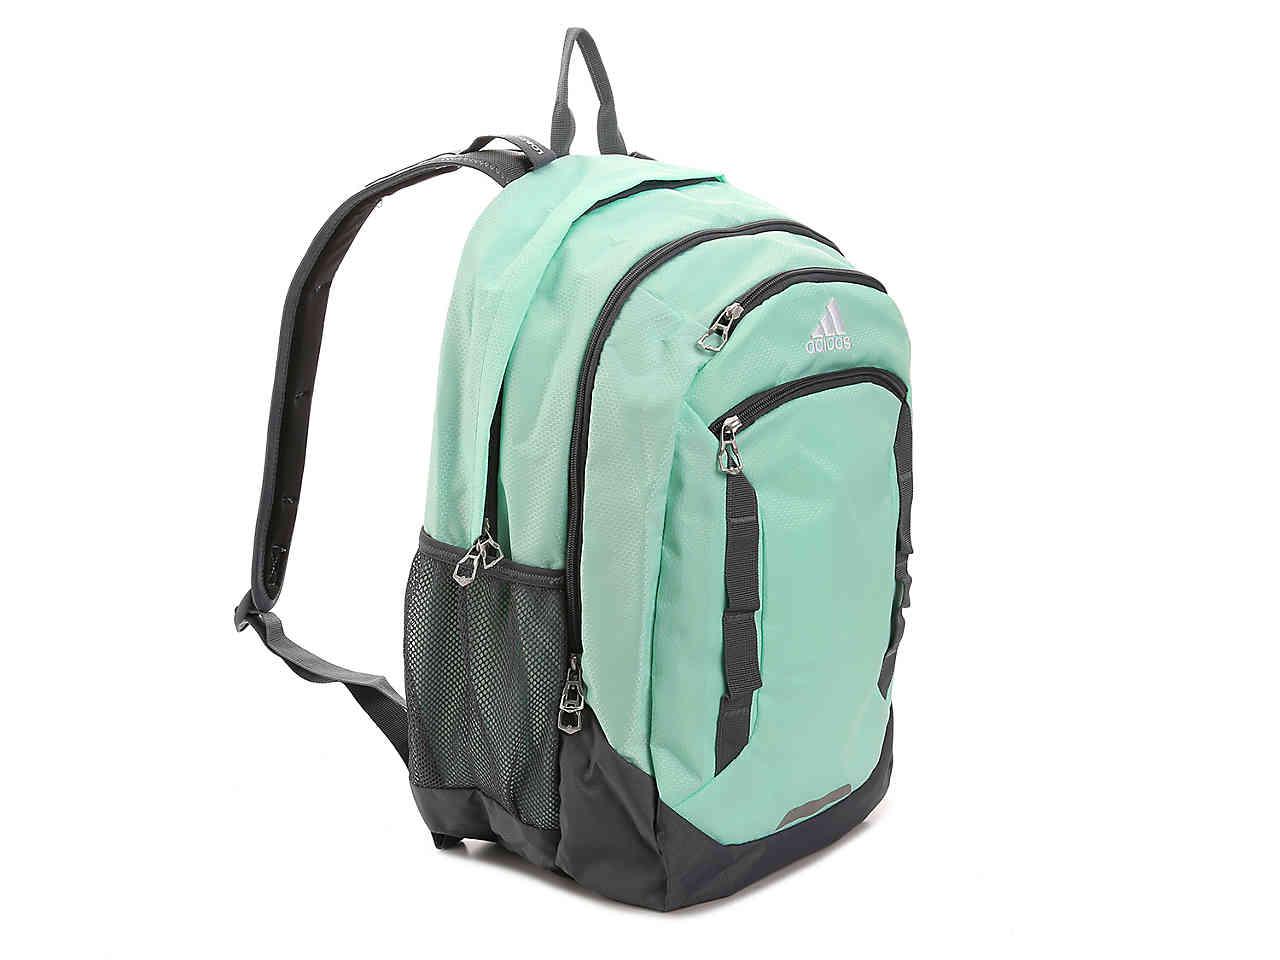 adidas excel iv backpack mint